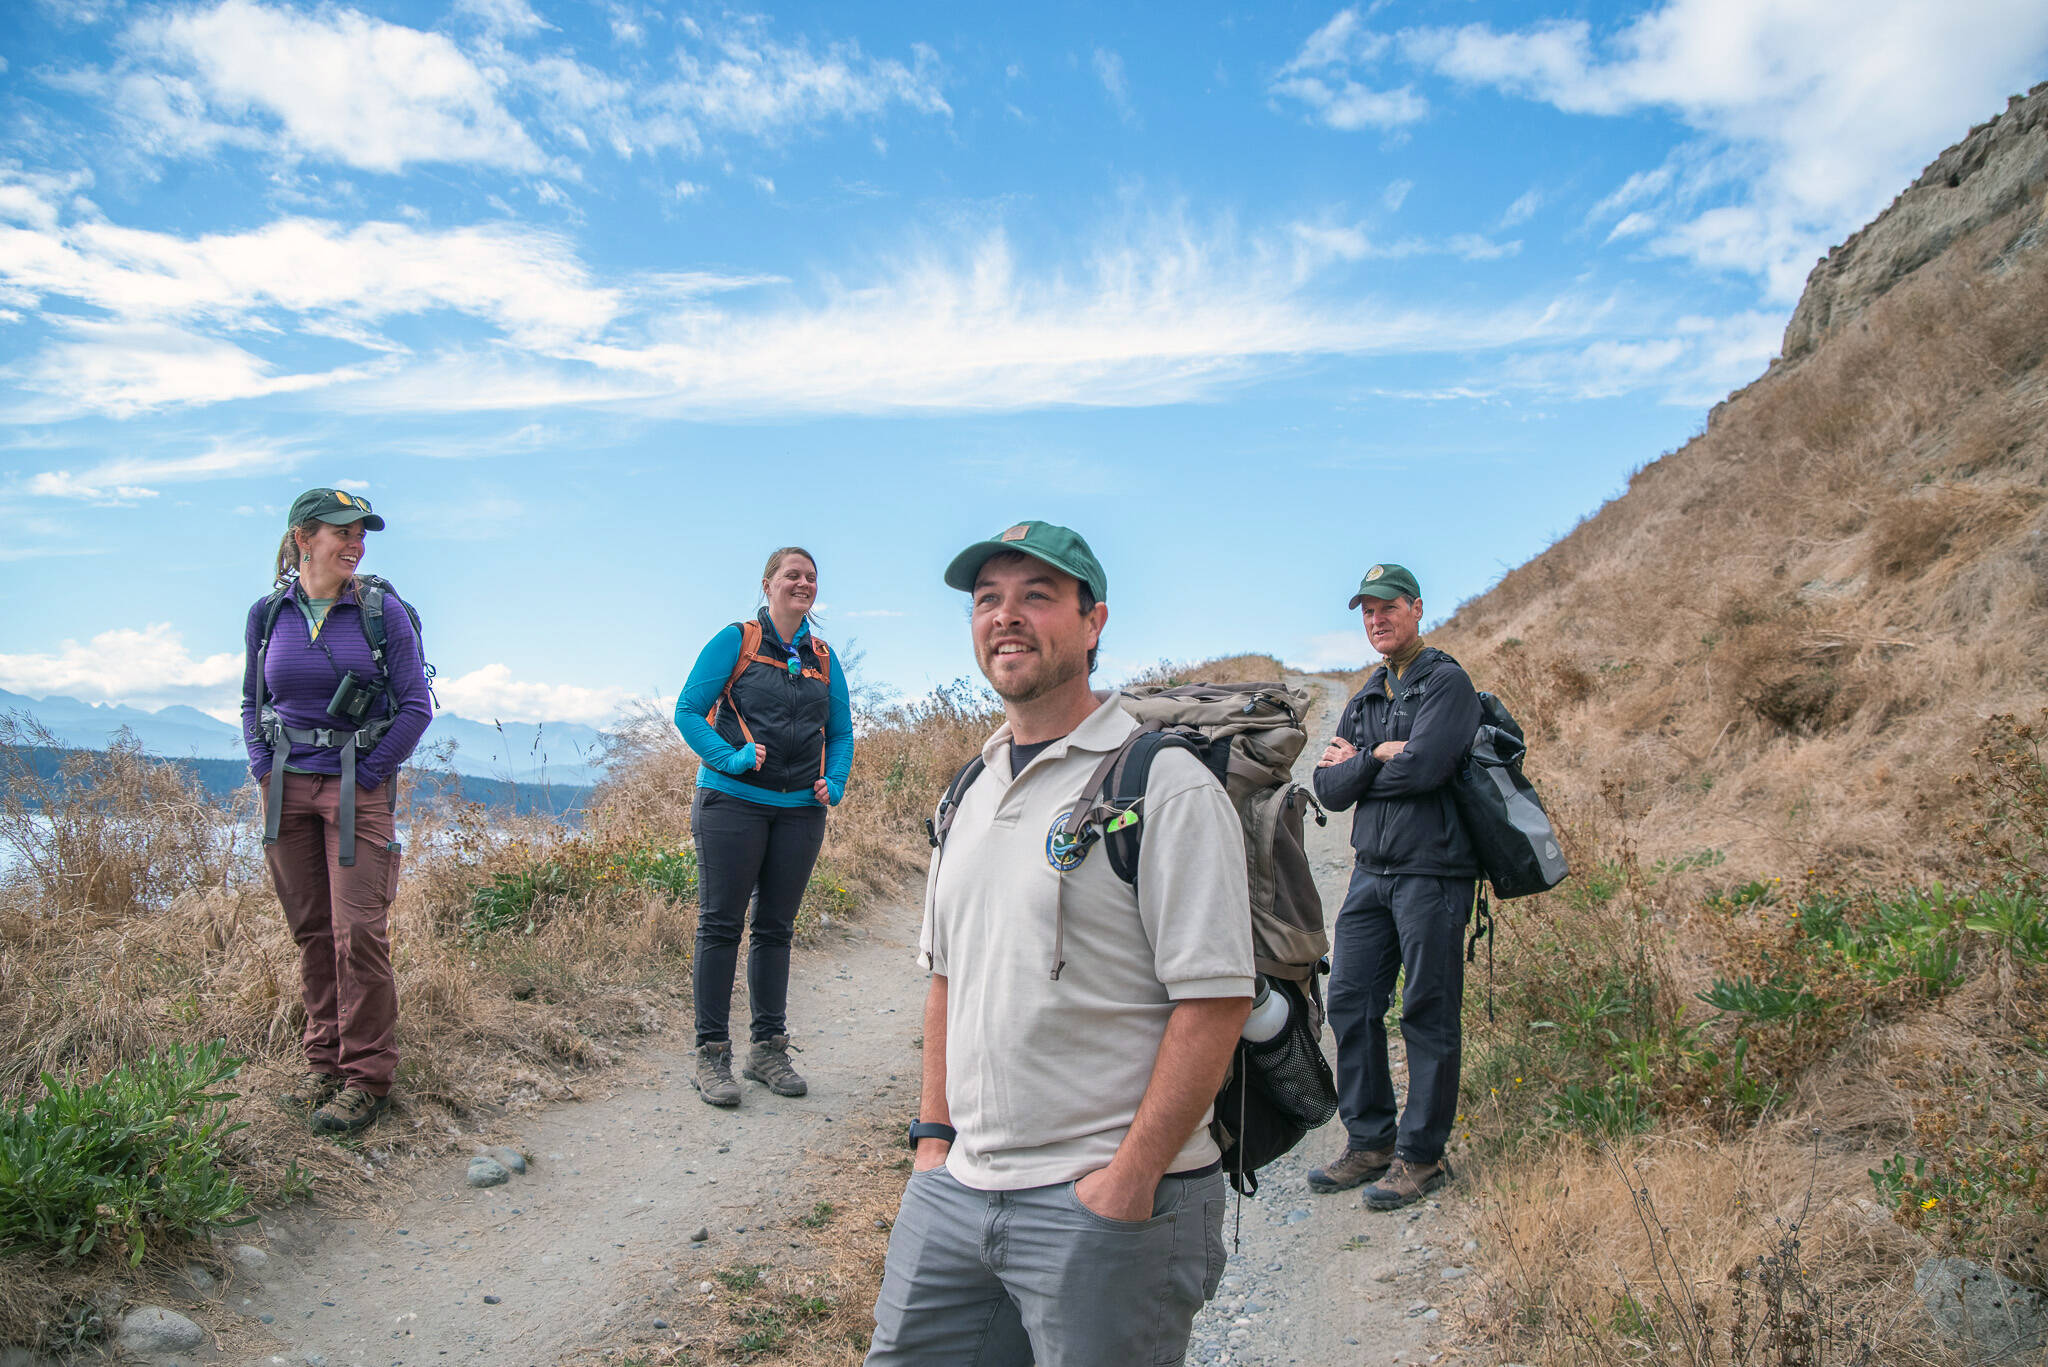 Senior Research Scientist Scott Pearson, right, leads a team from Washington State Fish and Wildlife on a tour along the road through Protection Island to a viewpoint of where the Aug. 3, 2021, fire burned through 26 acres, primarily on state protected land known as the Zella M. Schultz Seabird Sanctuary. From left, Katie Laushman, WDFW wildlife area manager, Samantha Montgomery, division manager, and Josh Cook, prairie restoration specialist, take in the view. Laushman and Cook are part of an effort to reseed burned areas with native plants.